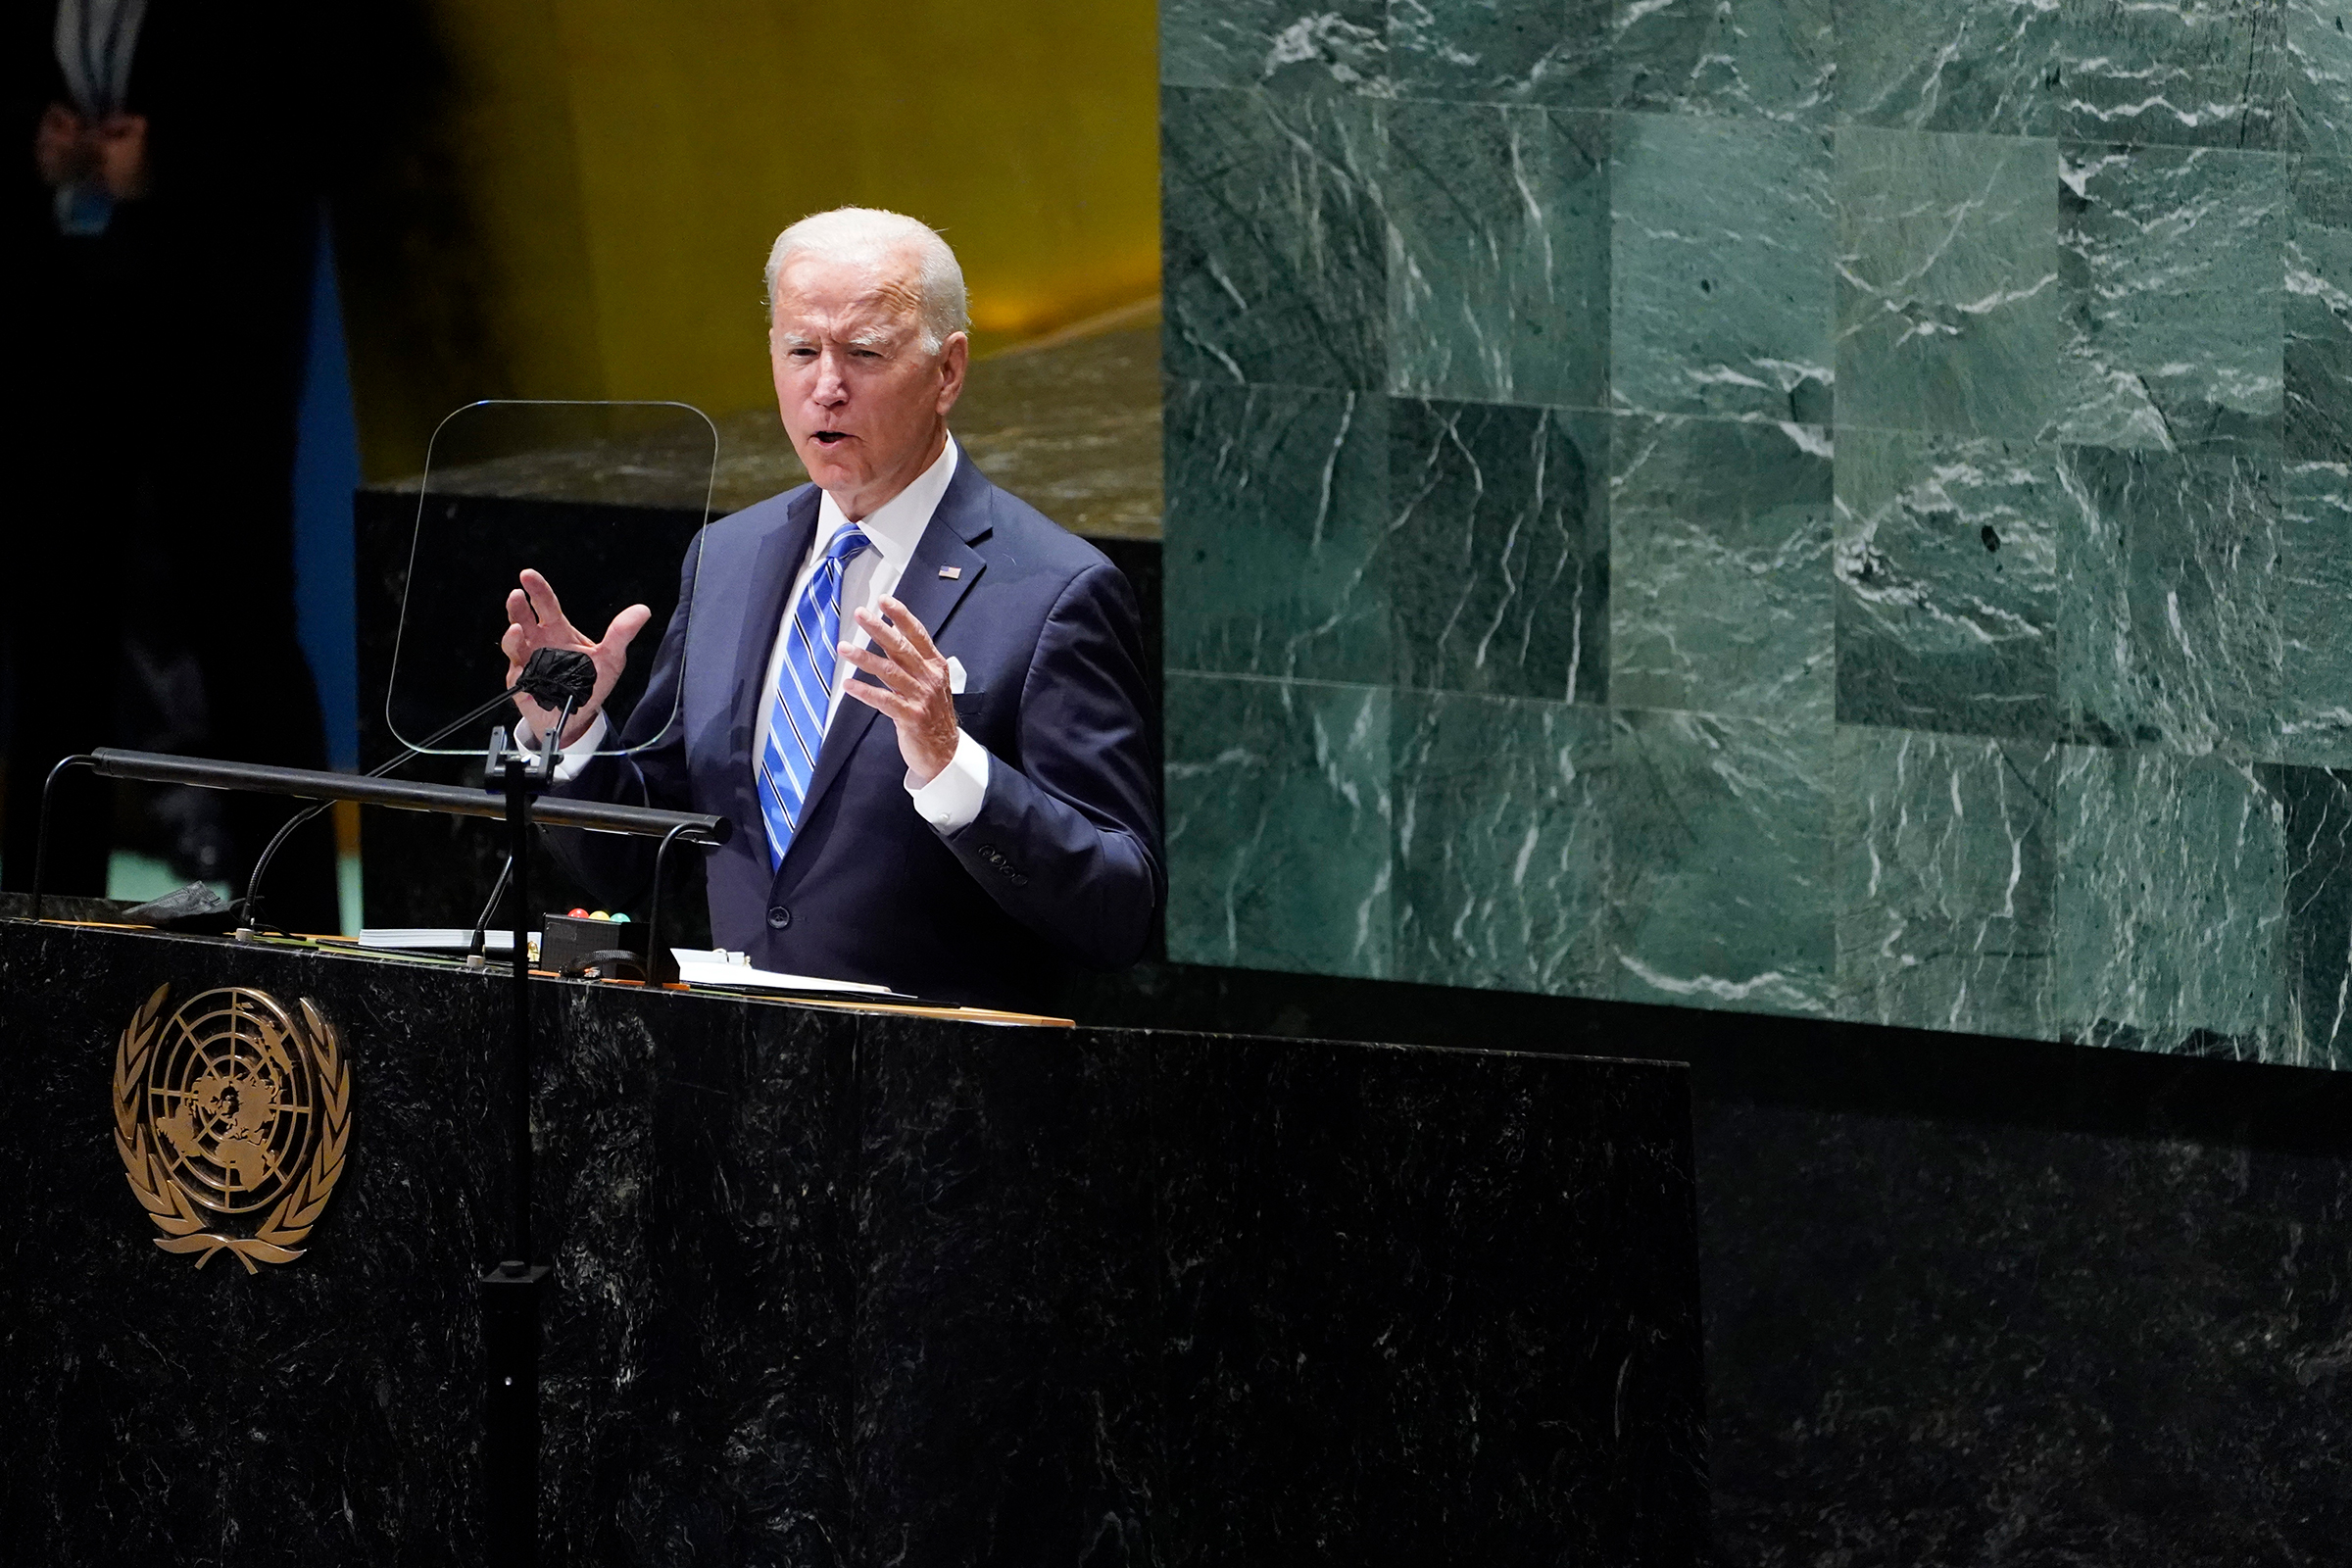 President Joe Biden delivers remarks to the United Nations General Assembly in New York on Sept. 21, 2021.